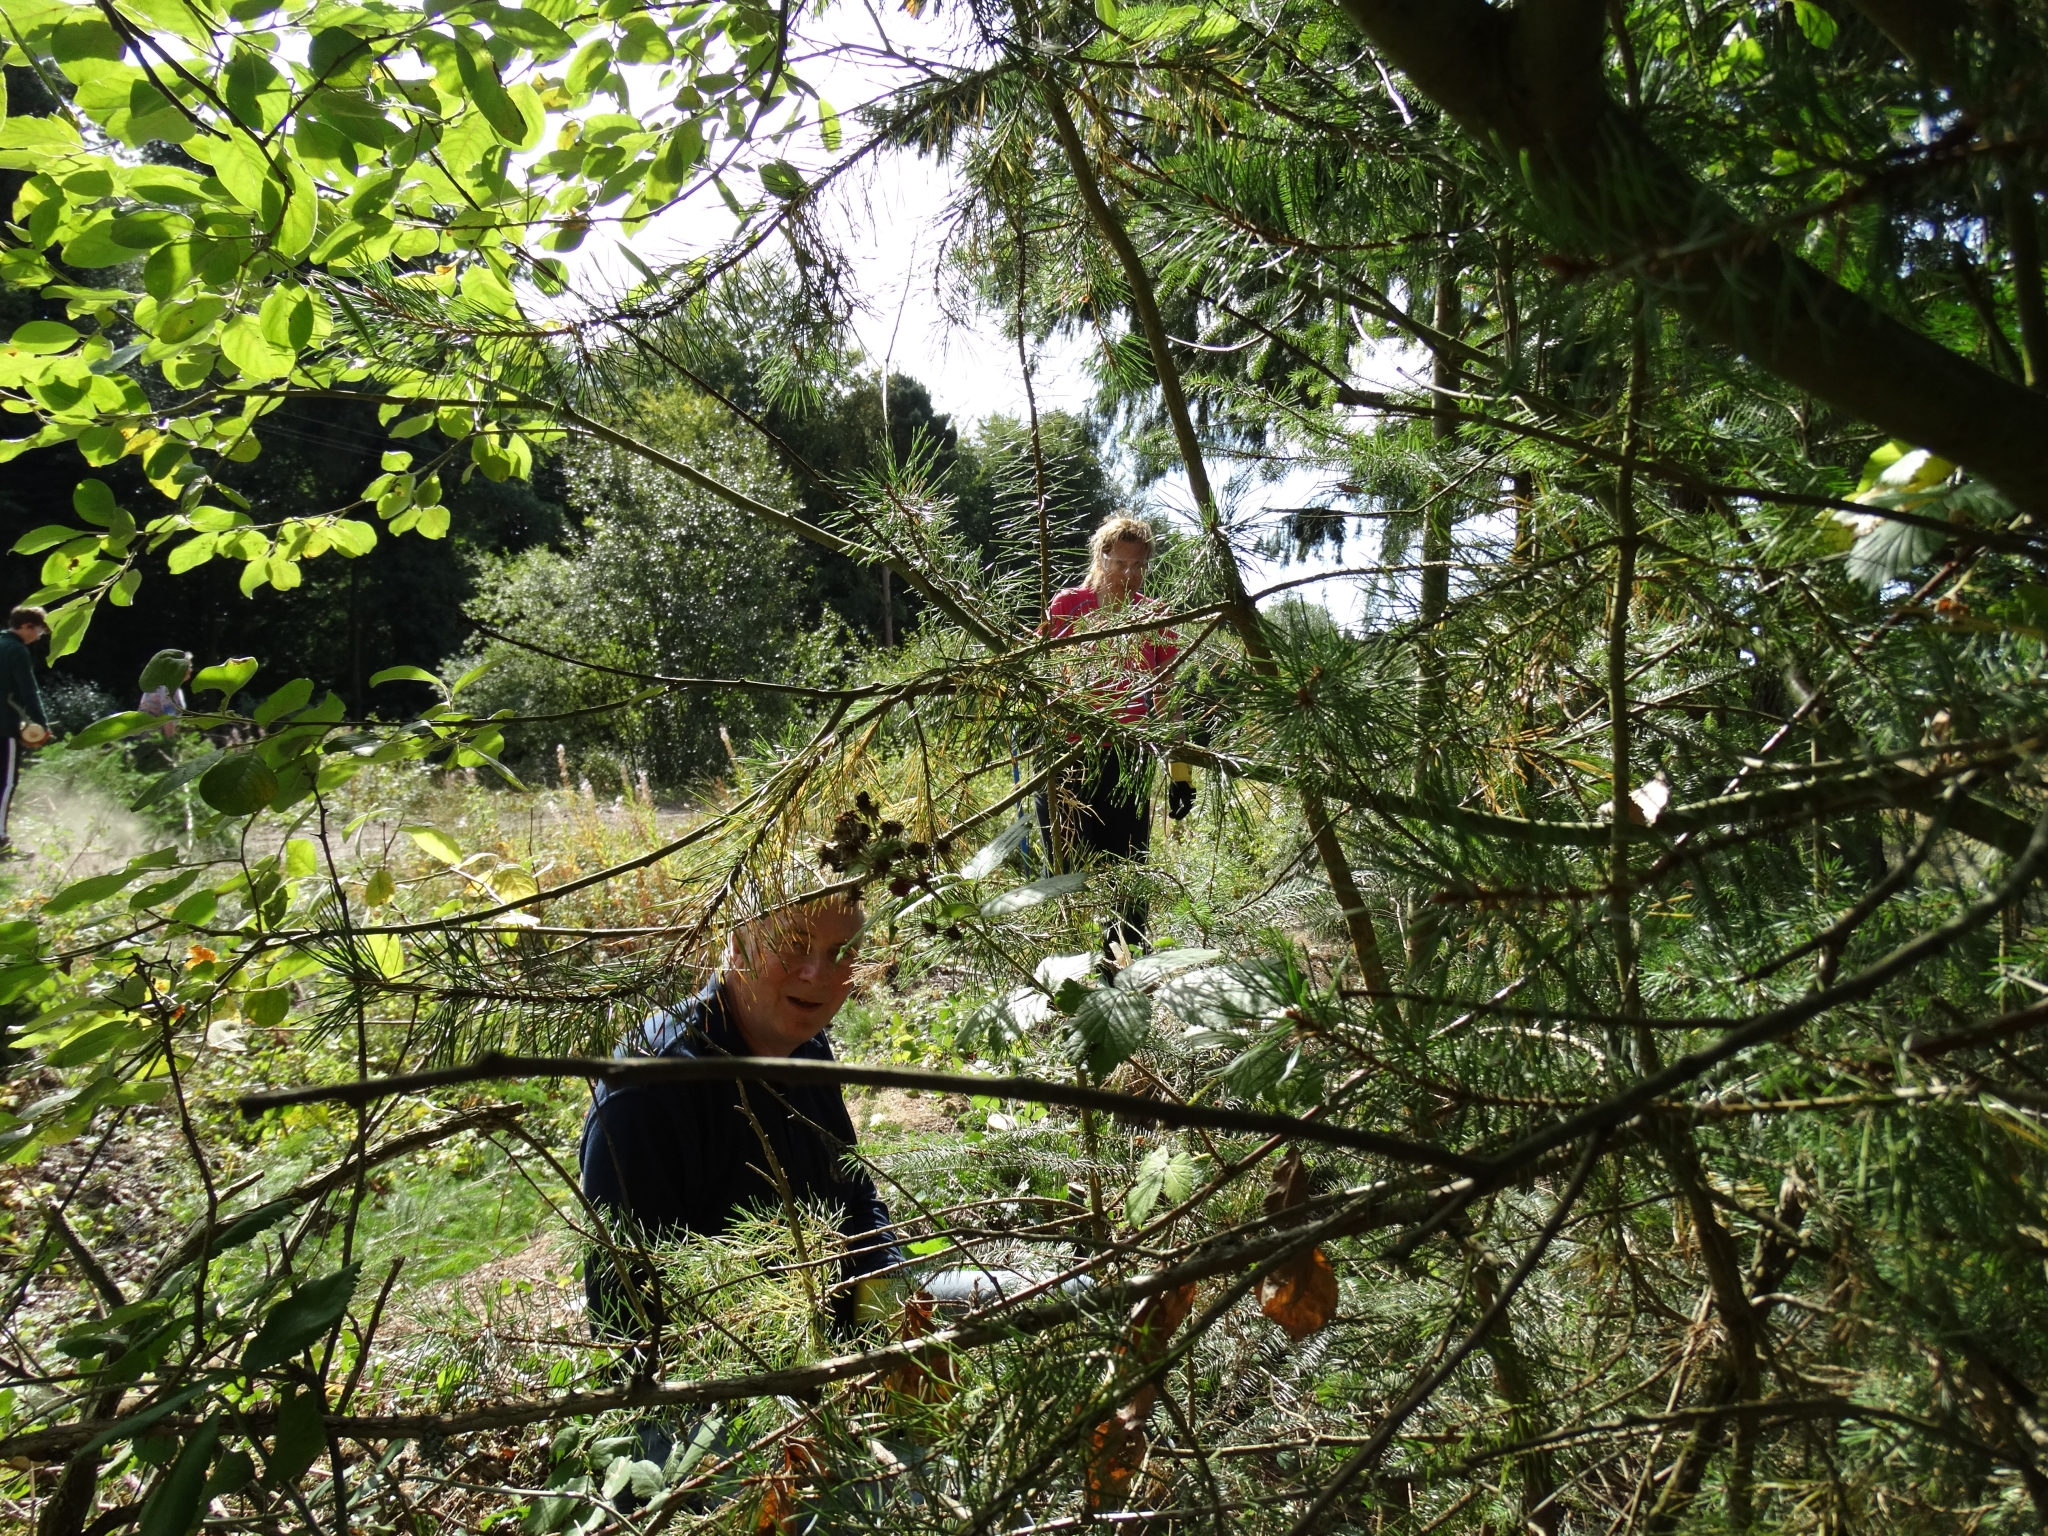 A photo from the FoTF Conservation Event - September 2019 - Scrub Clearance at Cranwich Camp : A volunteers works to clear scrub in the background (obscured by branches)